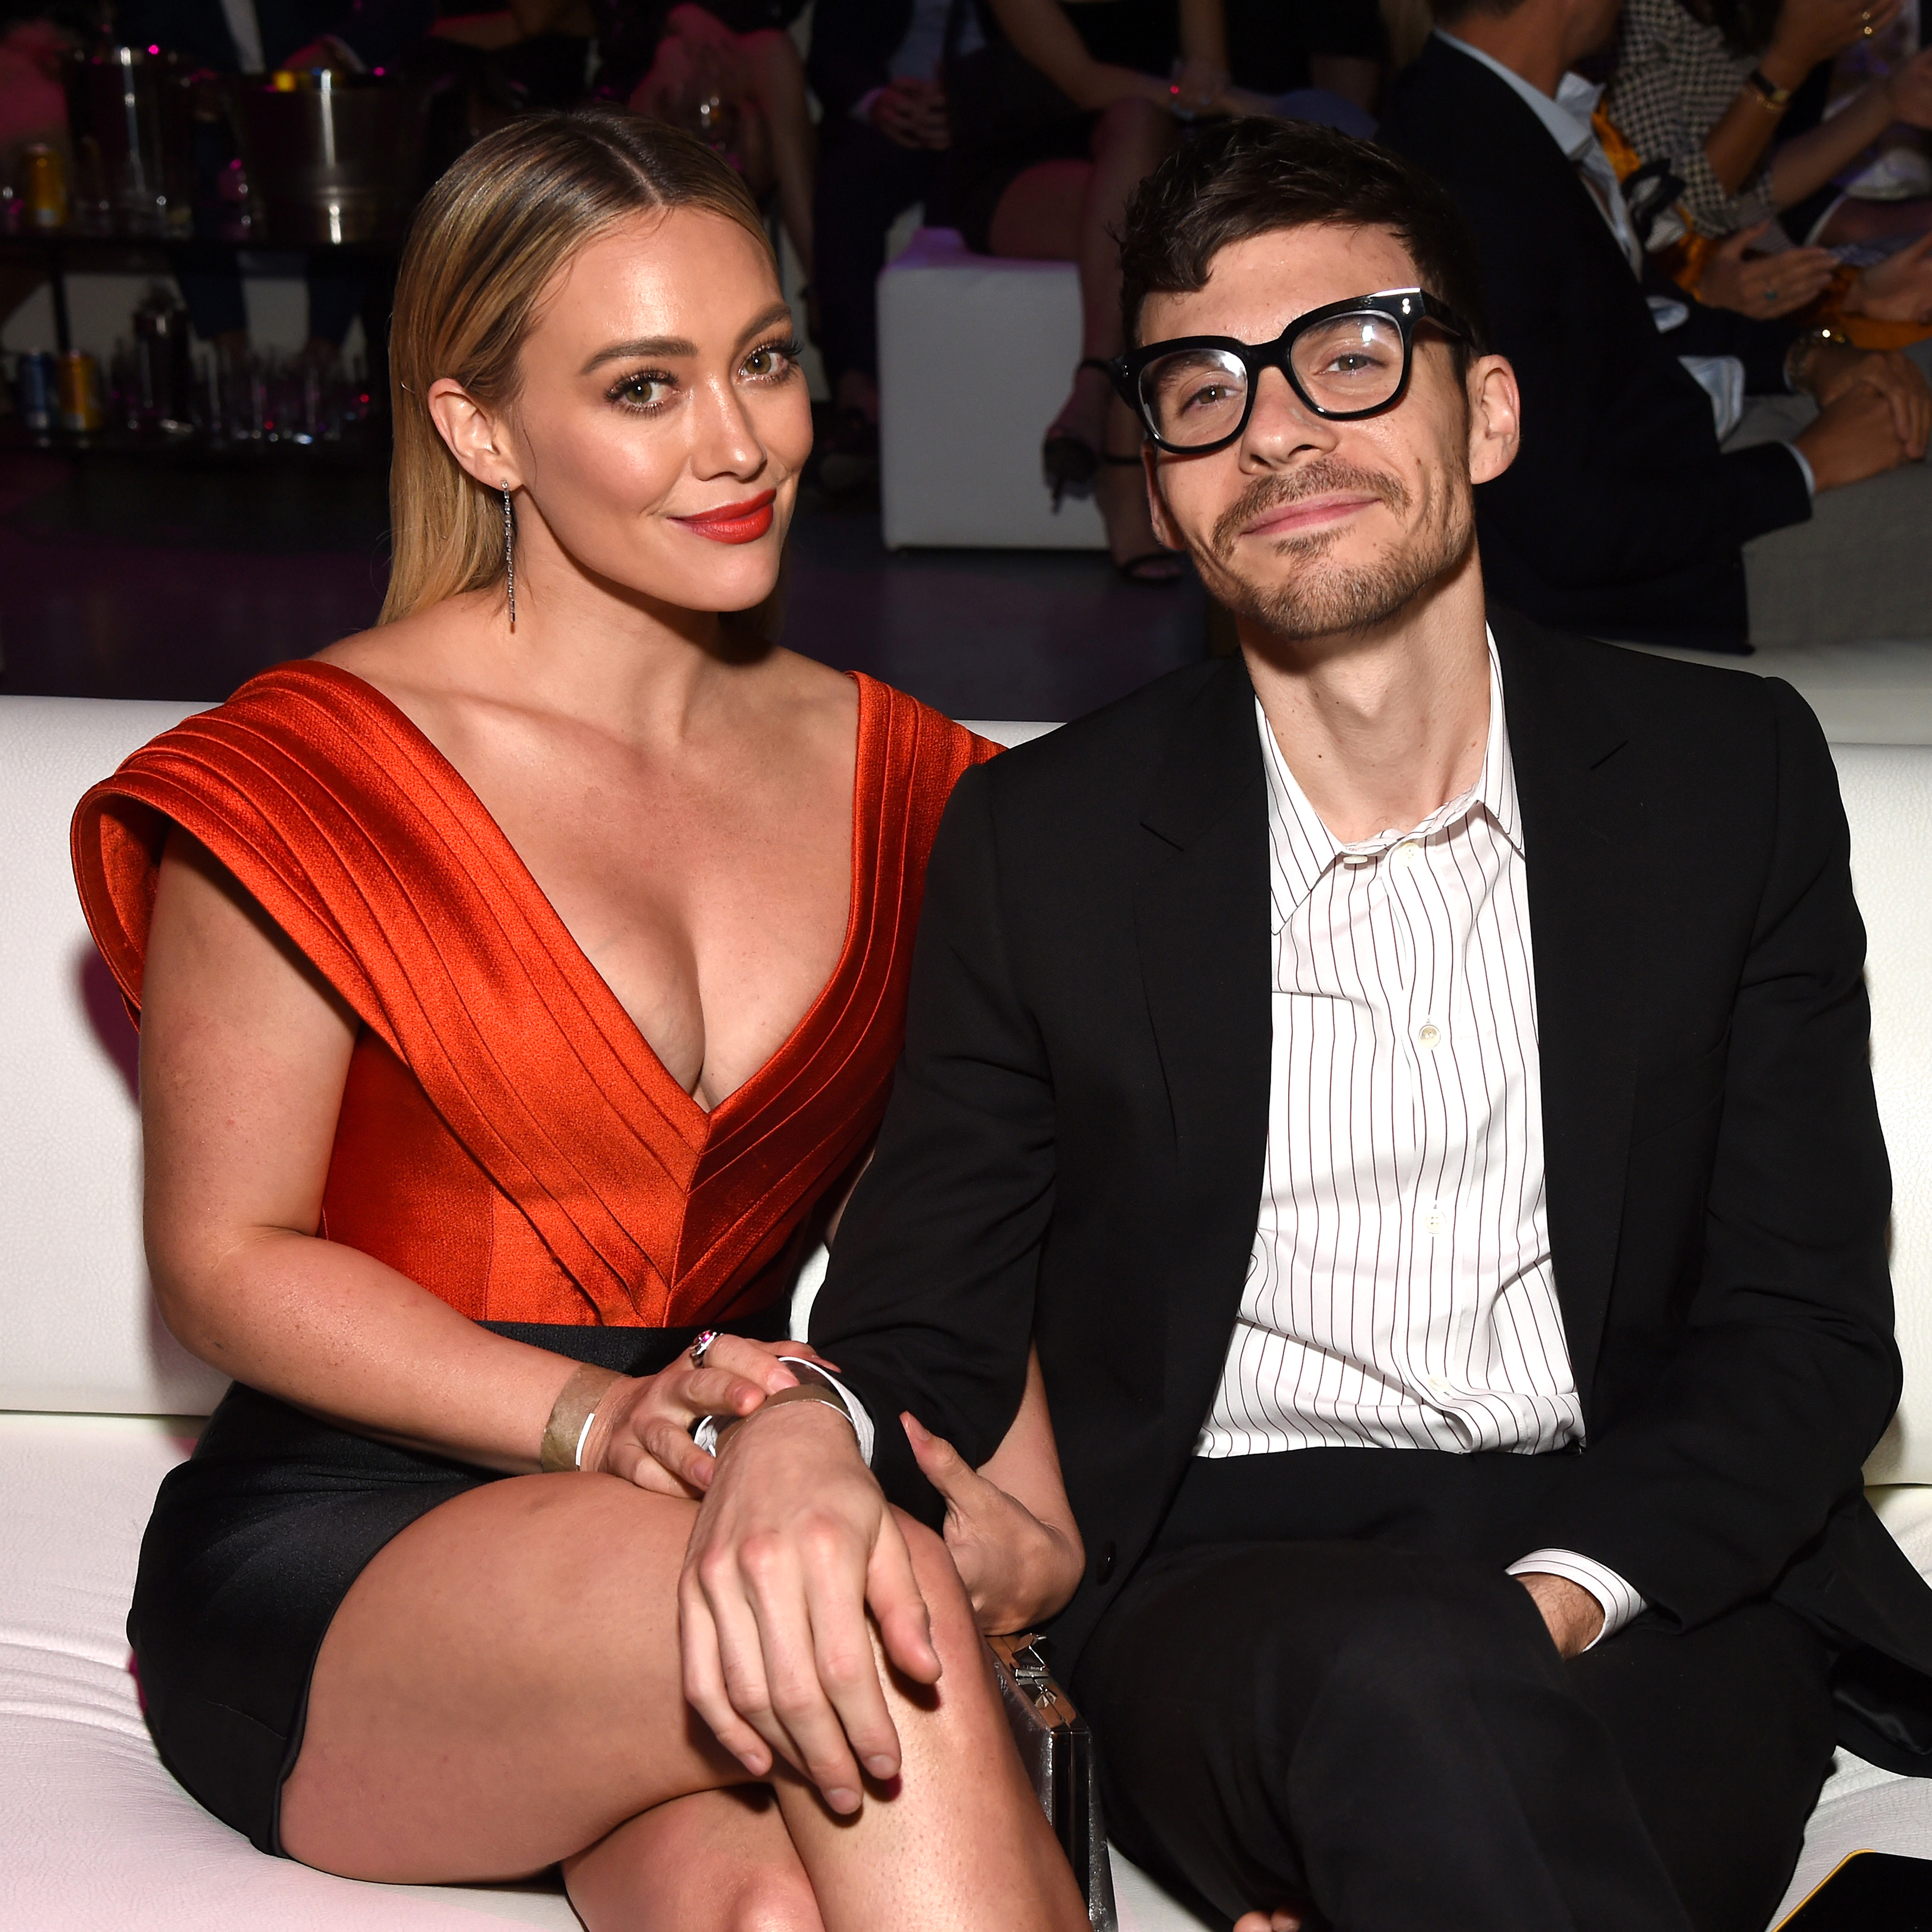 Hilary Duff's Engagement Ring Could Be Worth $100,000